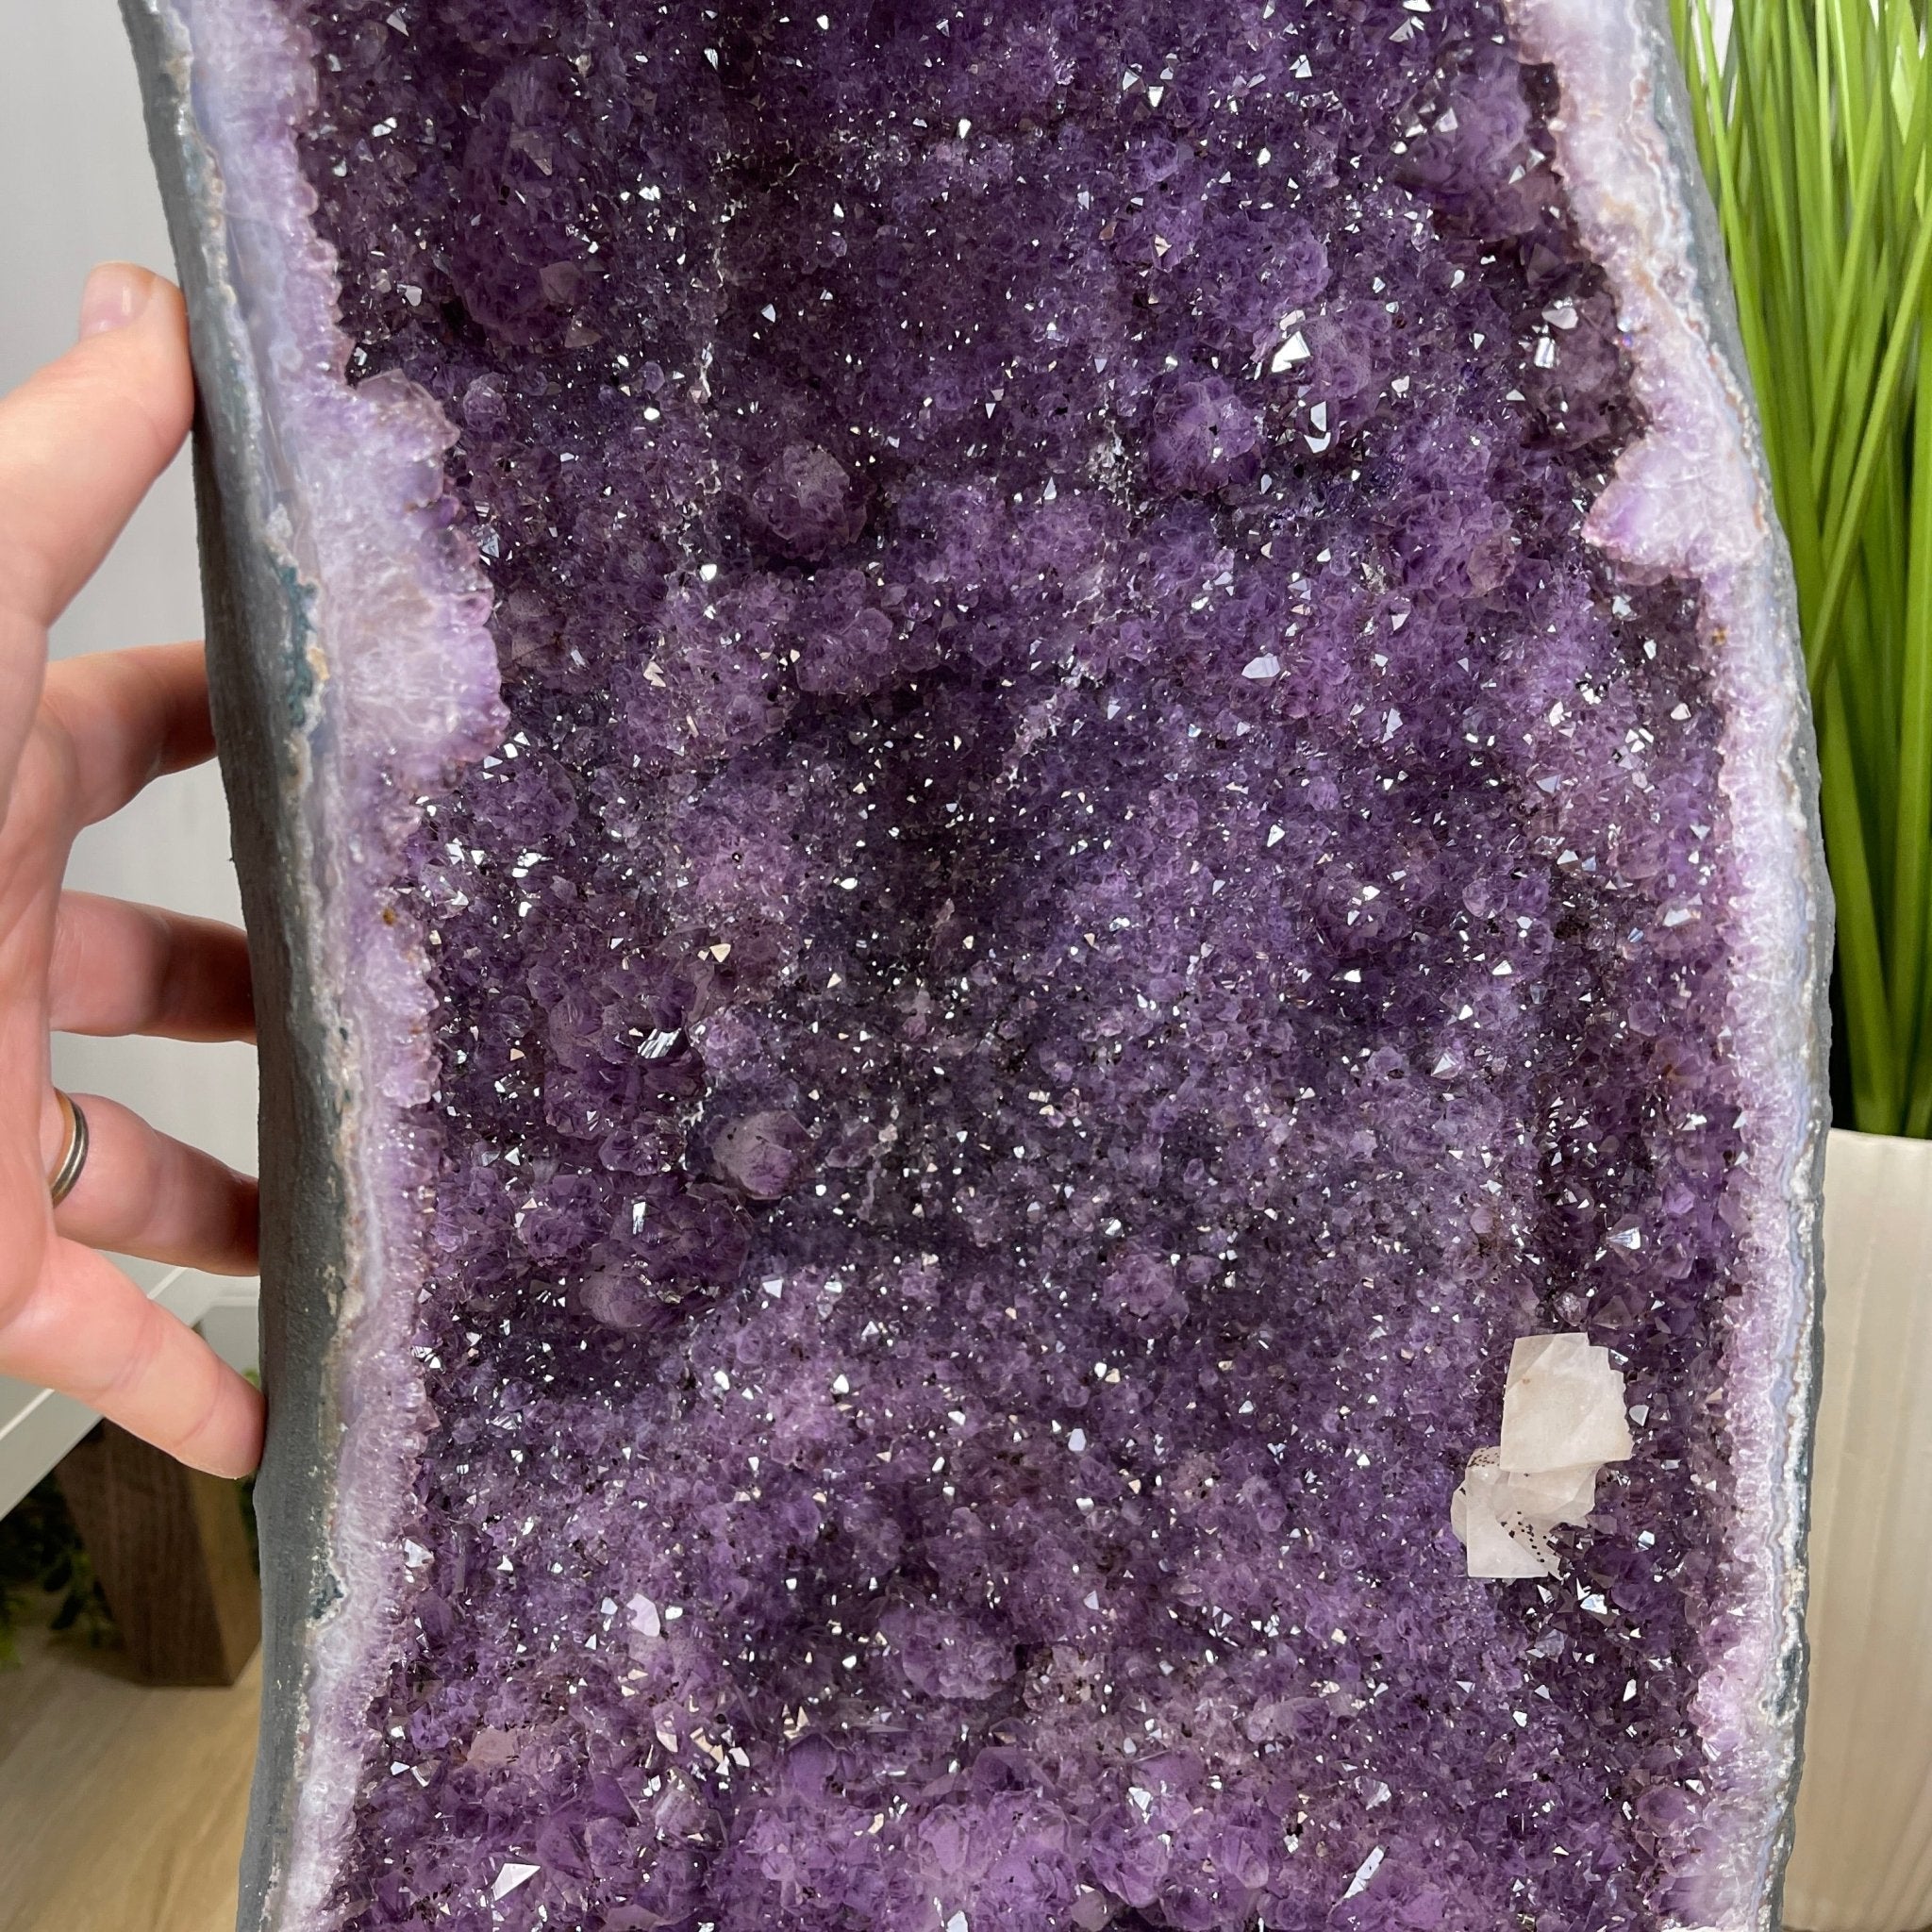 Extra Quality Brazilian Amethyst Cathedral, 29.8” tall & 111.5 lbs #5601-0570 by Brazil Gems - Brazil GemsBrazil GemsExtra Quality Brazilian Amethyst Cathedral, 29.8” tall & 111.5 lbs #5601-0570 by Brazil GemsCathedrals5601-0570